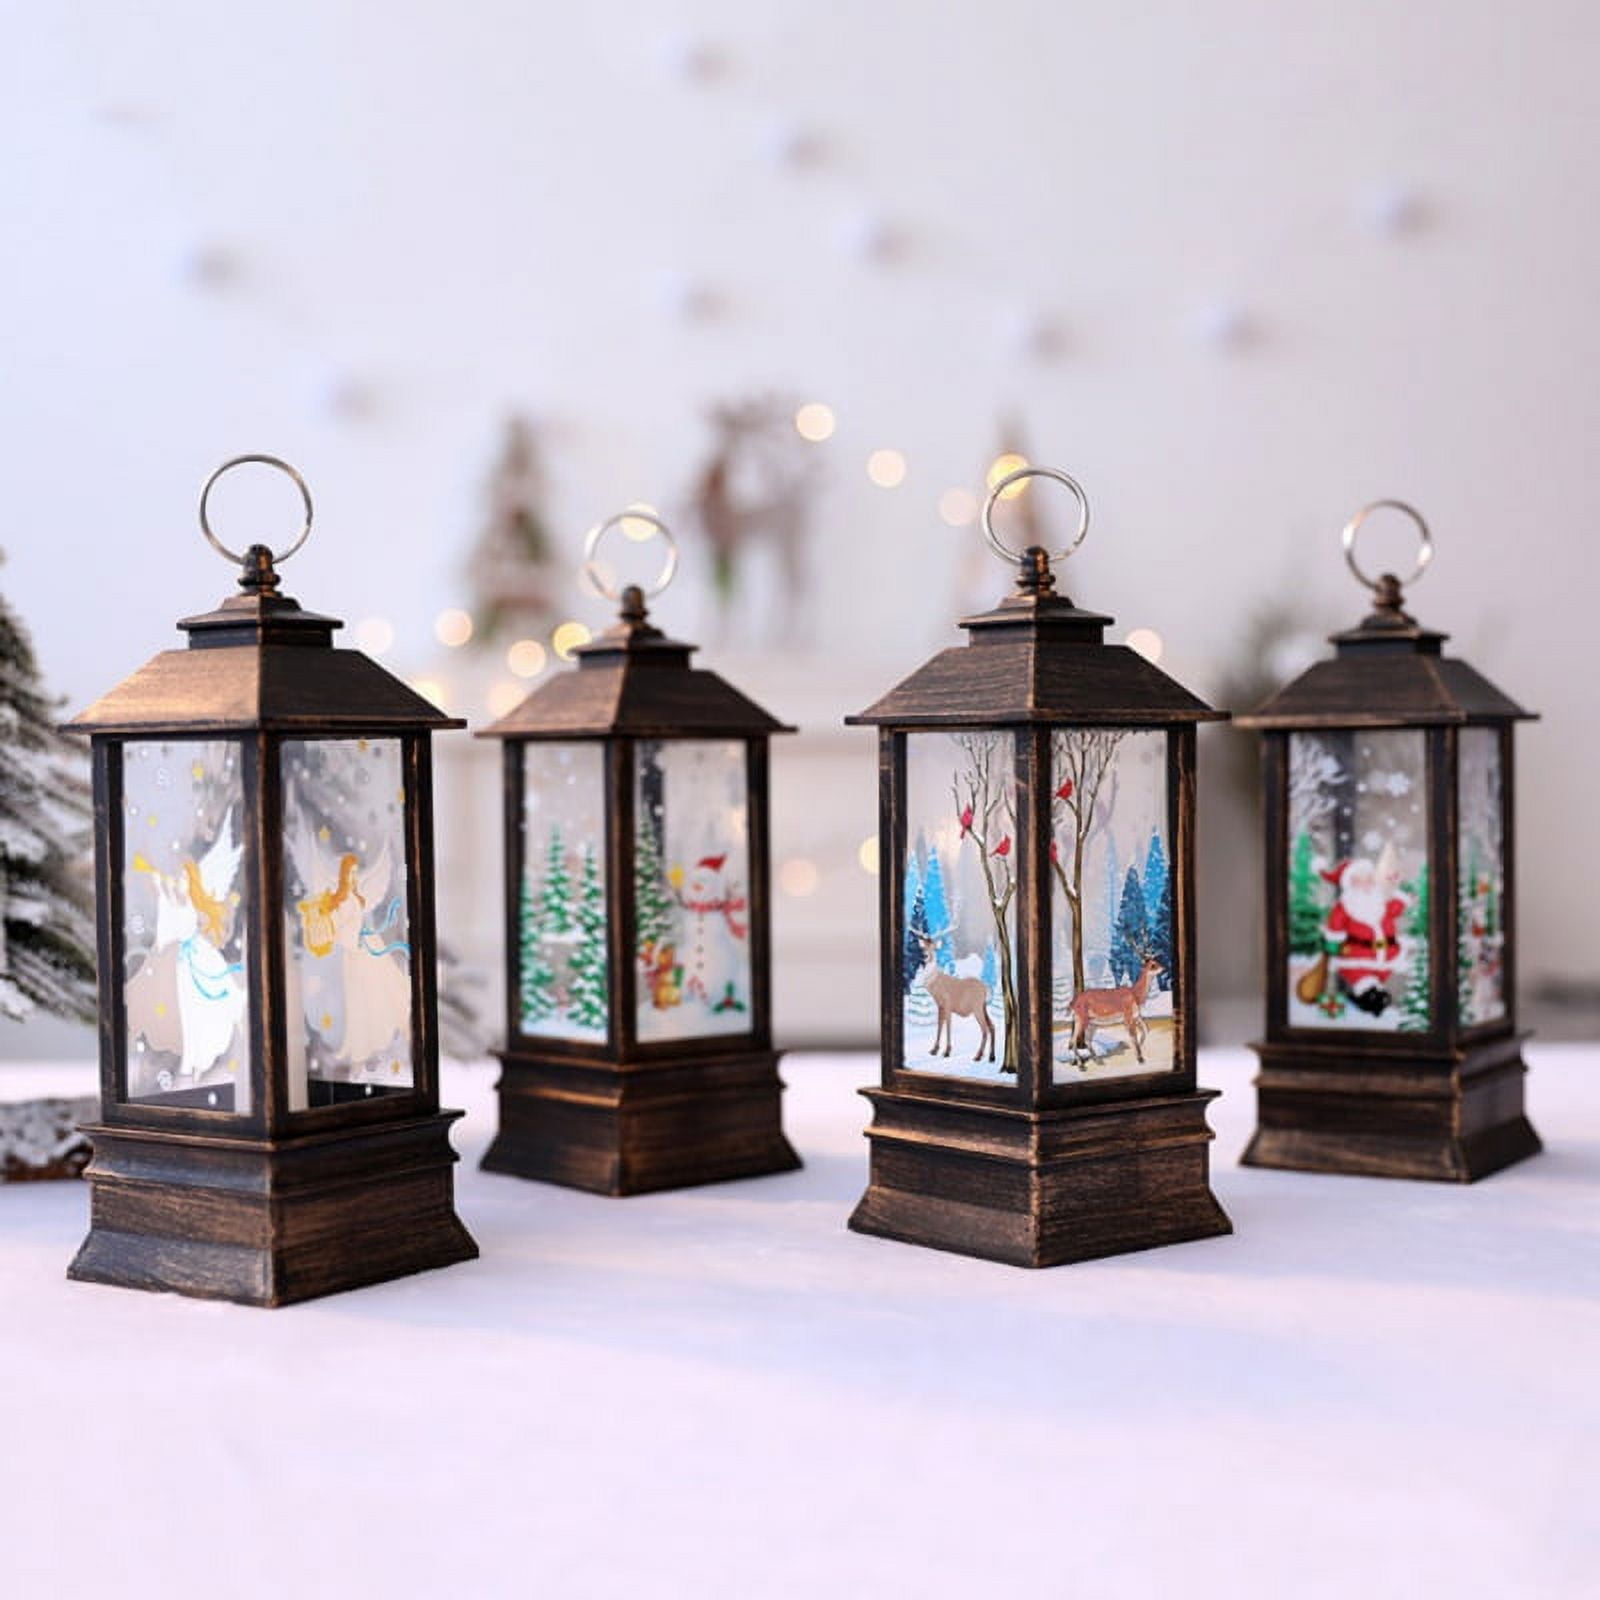 Vintage Decorative Lanterns Battery Powered LED, with 6 Hours  Timer,Indoor/Outdoor,Small Lanterns Decor for Christmas,black-1pc 